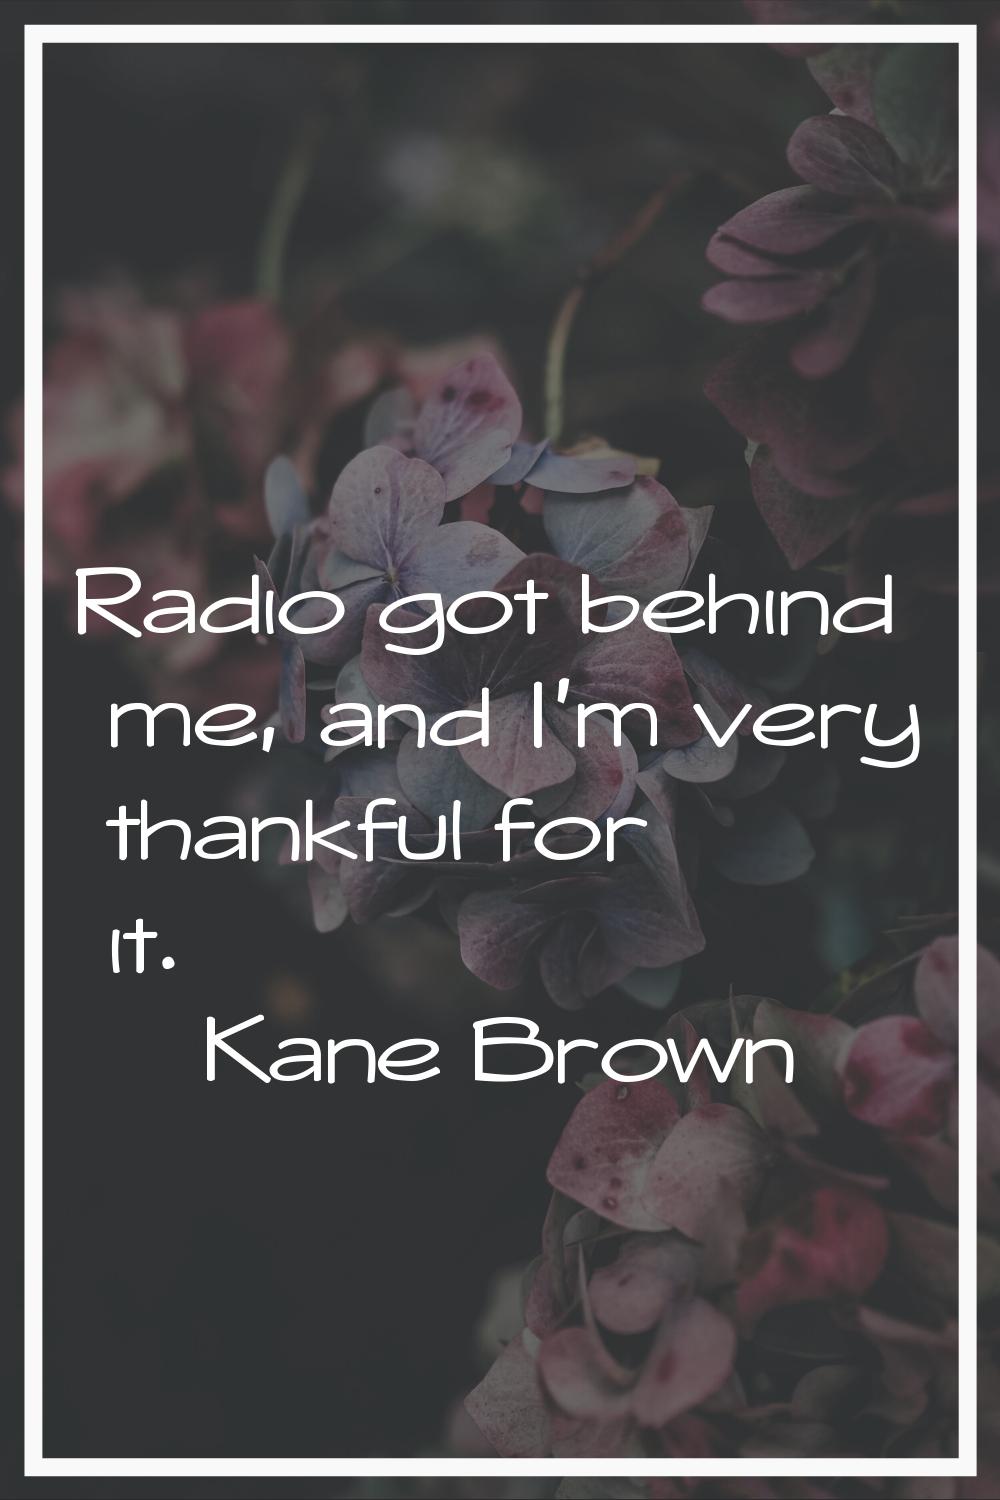 Radio got behind me, and I'm very thankful for it.